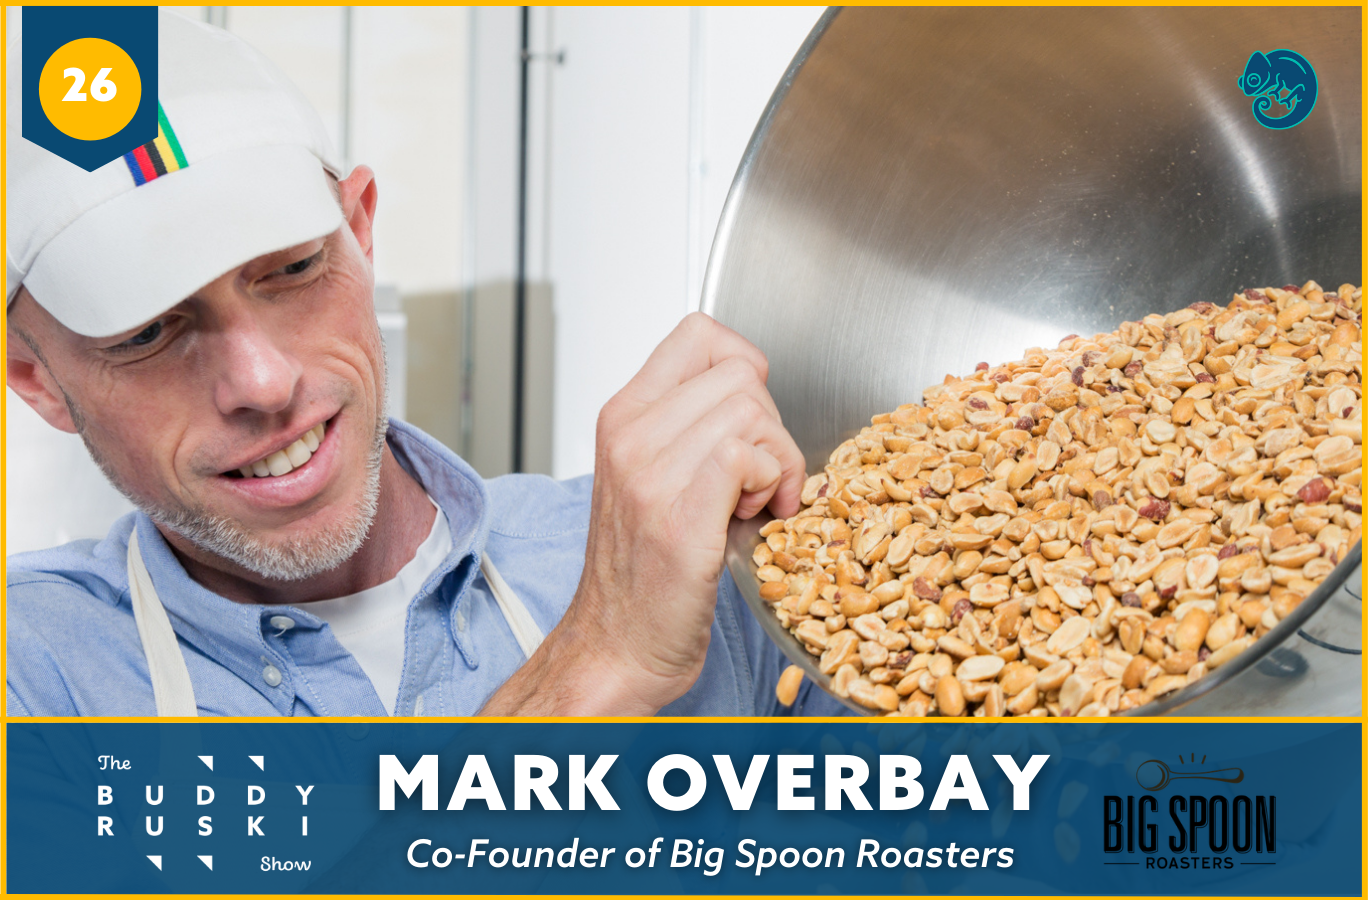 Healthy Eating, Maintaining Your Values At-Scale, and Peanut Butter by the Spoonful with Mark Overbay | The Buddy Ruski Show (Ep. 26)